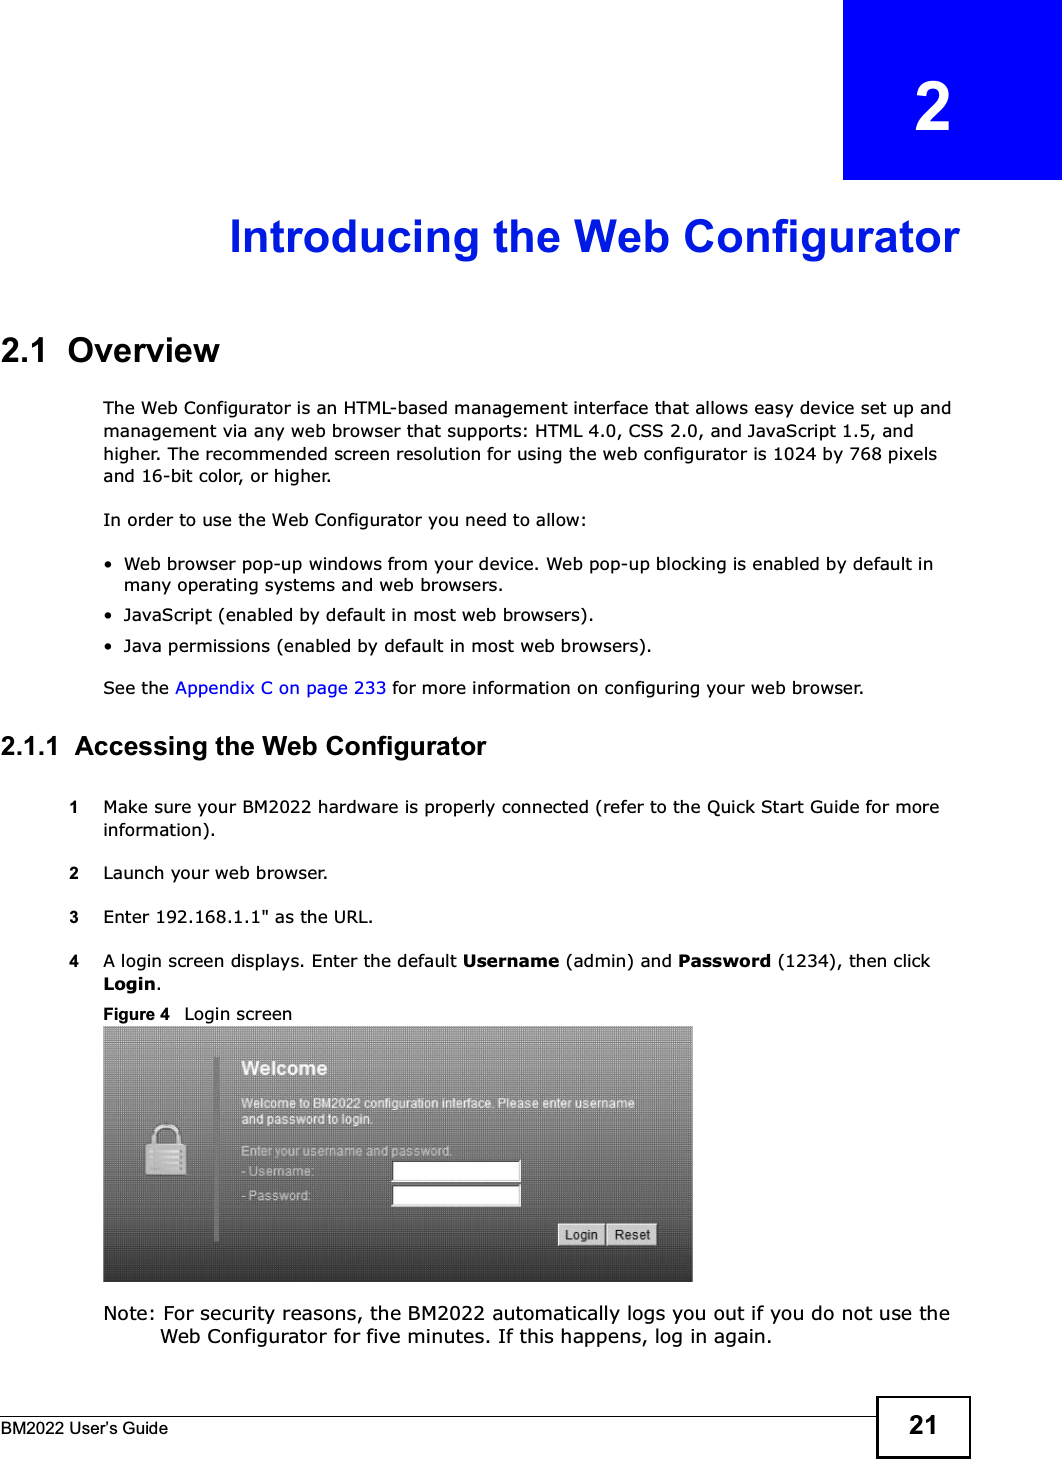 BM2022 Users Guide 21CHAPTER   2Introducing the Web Configurator2.1  OverviewThe Web Configurator is an HTML-based management interface that allows easy device set up and management via any web browser that supports: HTML 4.0, CSS 2.0, and JavaScript 1.5, and higher. The recommended screen resolution for using the web configurator is 1024 by 768 pixels and 16-bit color, or higher.In order to use the Web Configurator you need to allow: Web browser pop-up windows from your device. Web pop-up blocking is enabled by default in many operating systems and web browsers. JavaScript (enabled by default in most web browsers). Java permissions (enabled by default in most web browsers).See the Appendix C on page 233 for more information on configuring your web browser.2.1.1  Accessing the Web Configurator1Make sure your BM2022 hardware is properly connected (refer to the Quick Start Guide for more information).2Launch your web browser.3Enter 192.168.1.1&quot; as the URL.4A login screen displays. Enter the default Username (admin) and Password (1234), then click Login.Figure 4   Login screenNote: For security reasons, the BM2022 automatically logs you out if you do not use the Web Configurator for five minutes. If this happens, log in again.